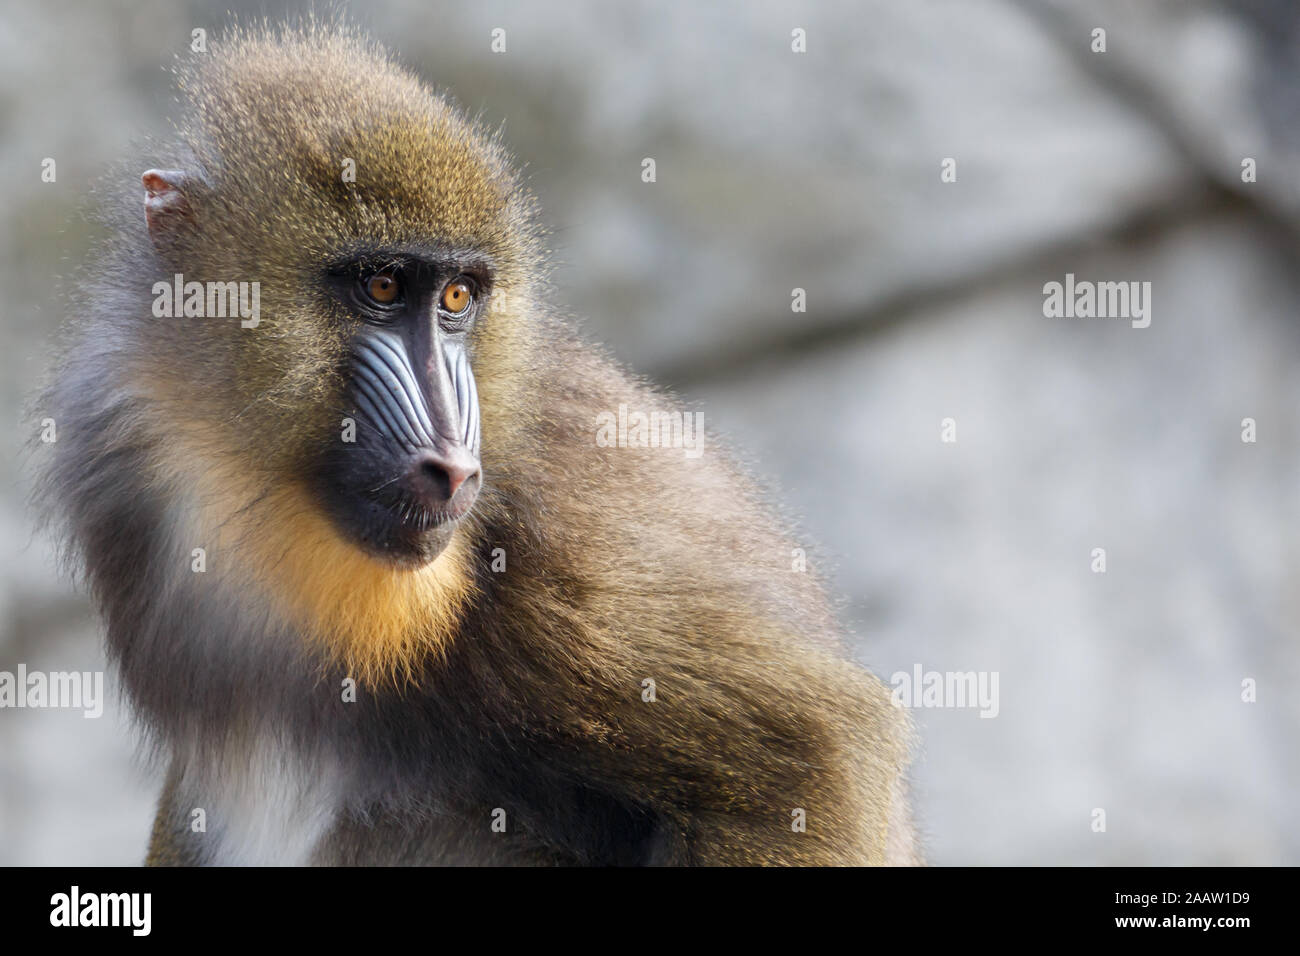 Mandril Monkey With Colourful Snout Staring Intently Stock Photo